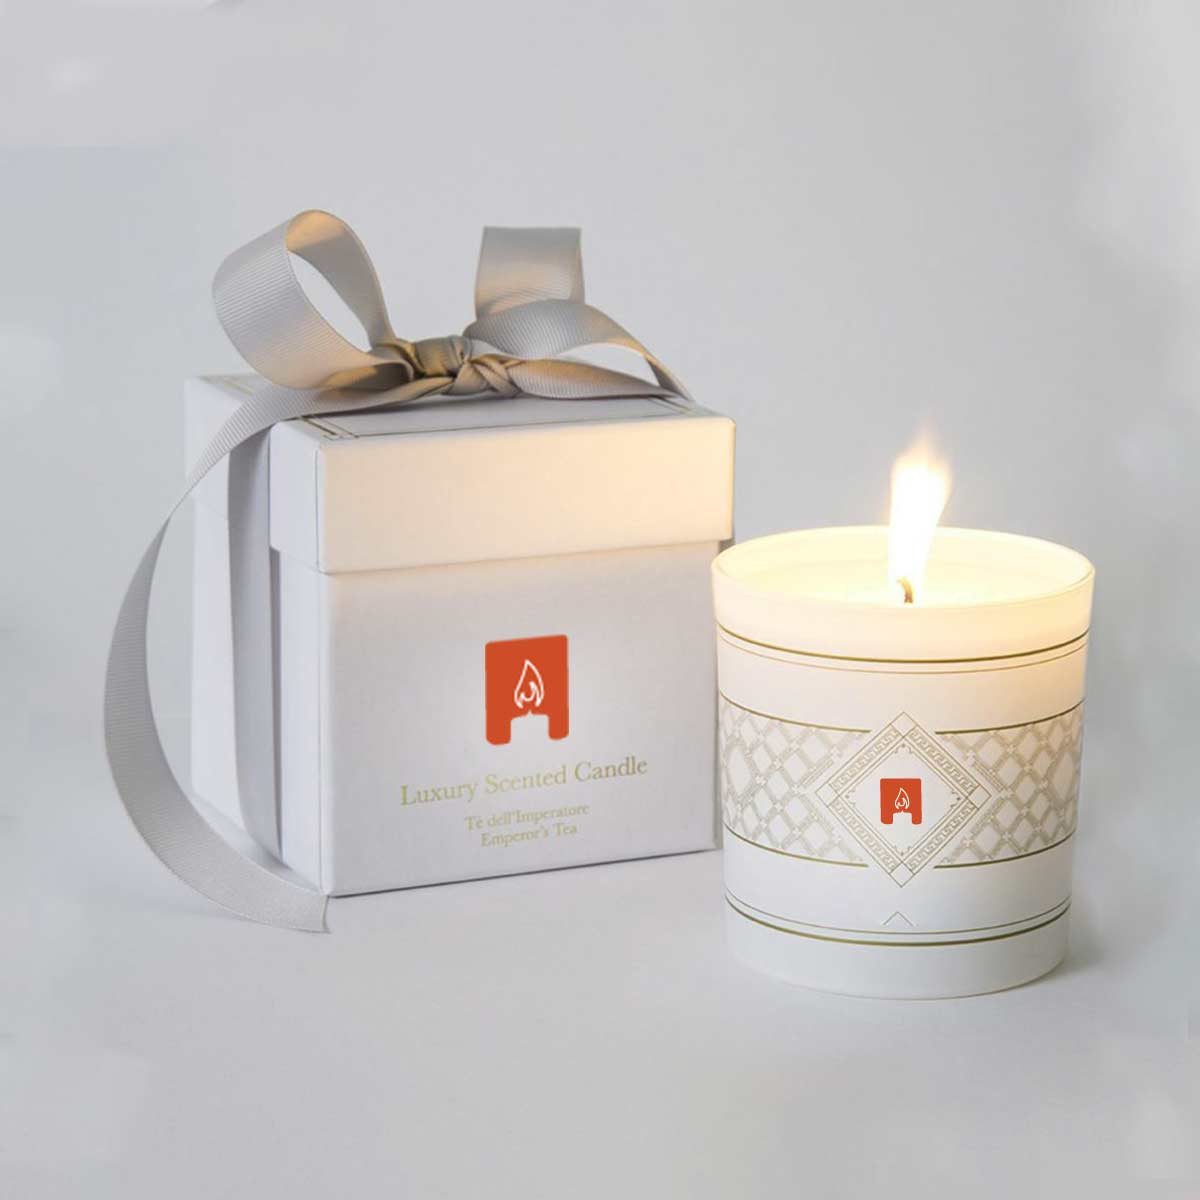 Custom White Candle Boxes Packaging, Wholesale Price | TCP